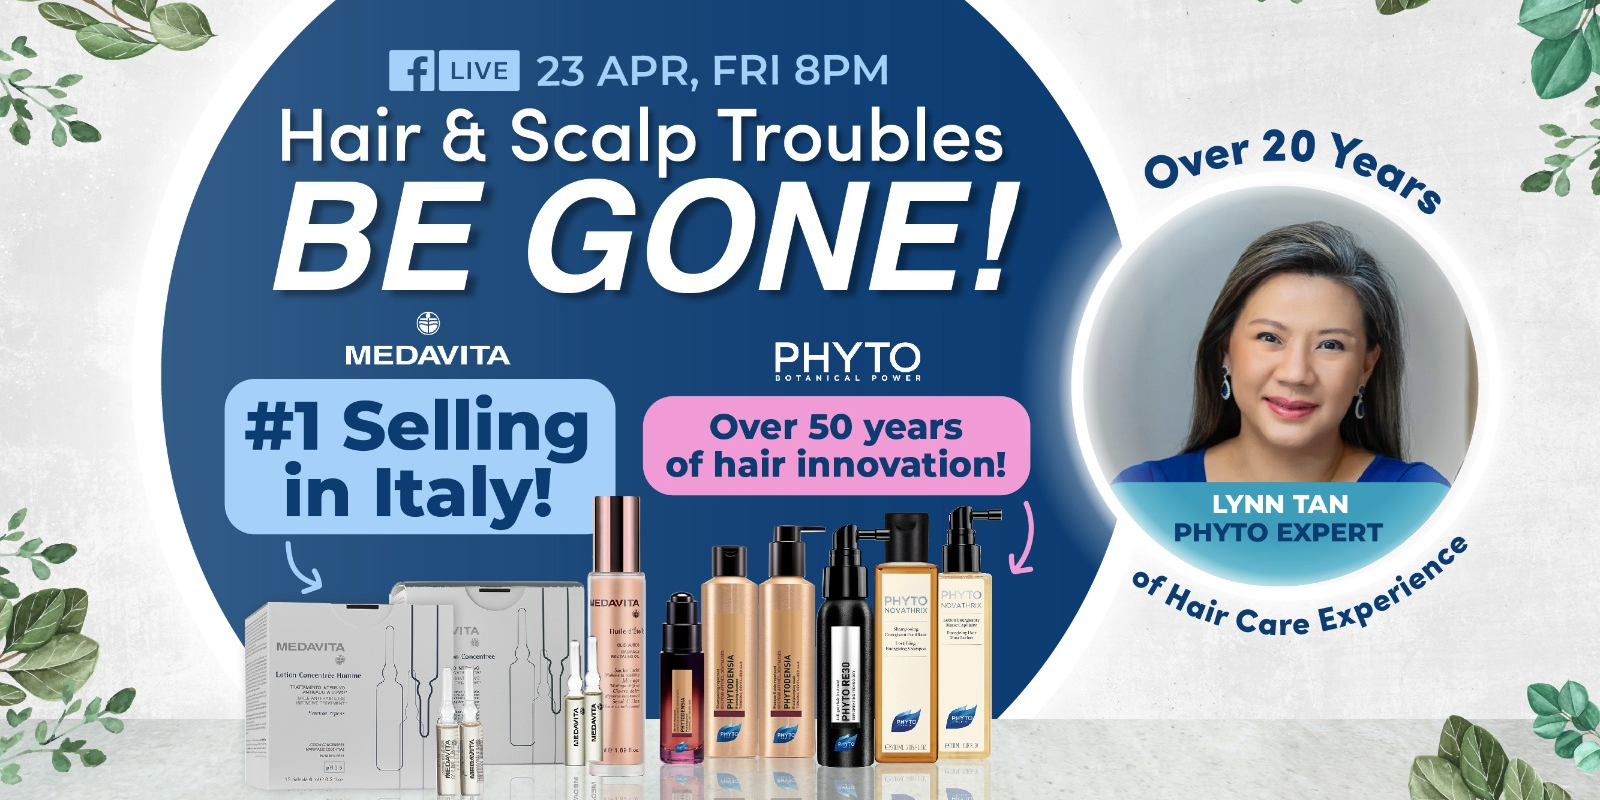 Hair & Scalp Troubles Be Gone!